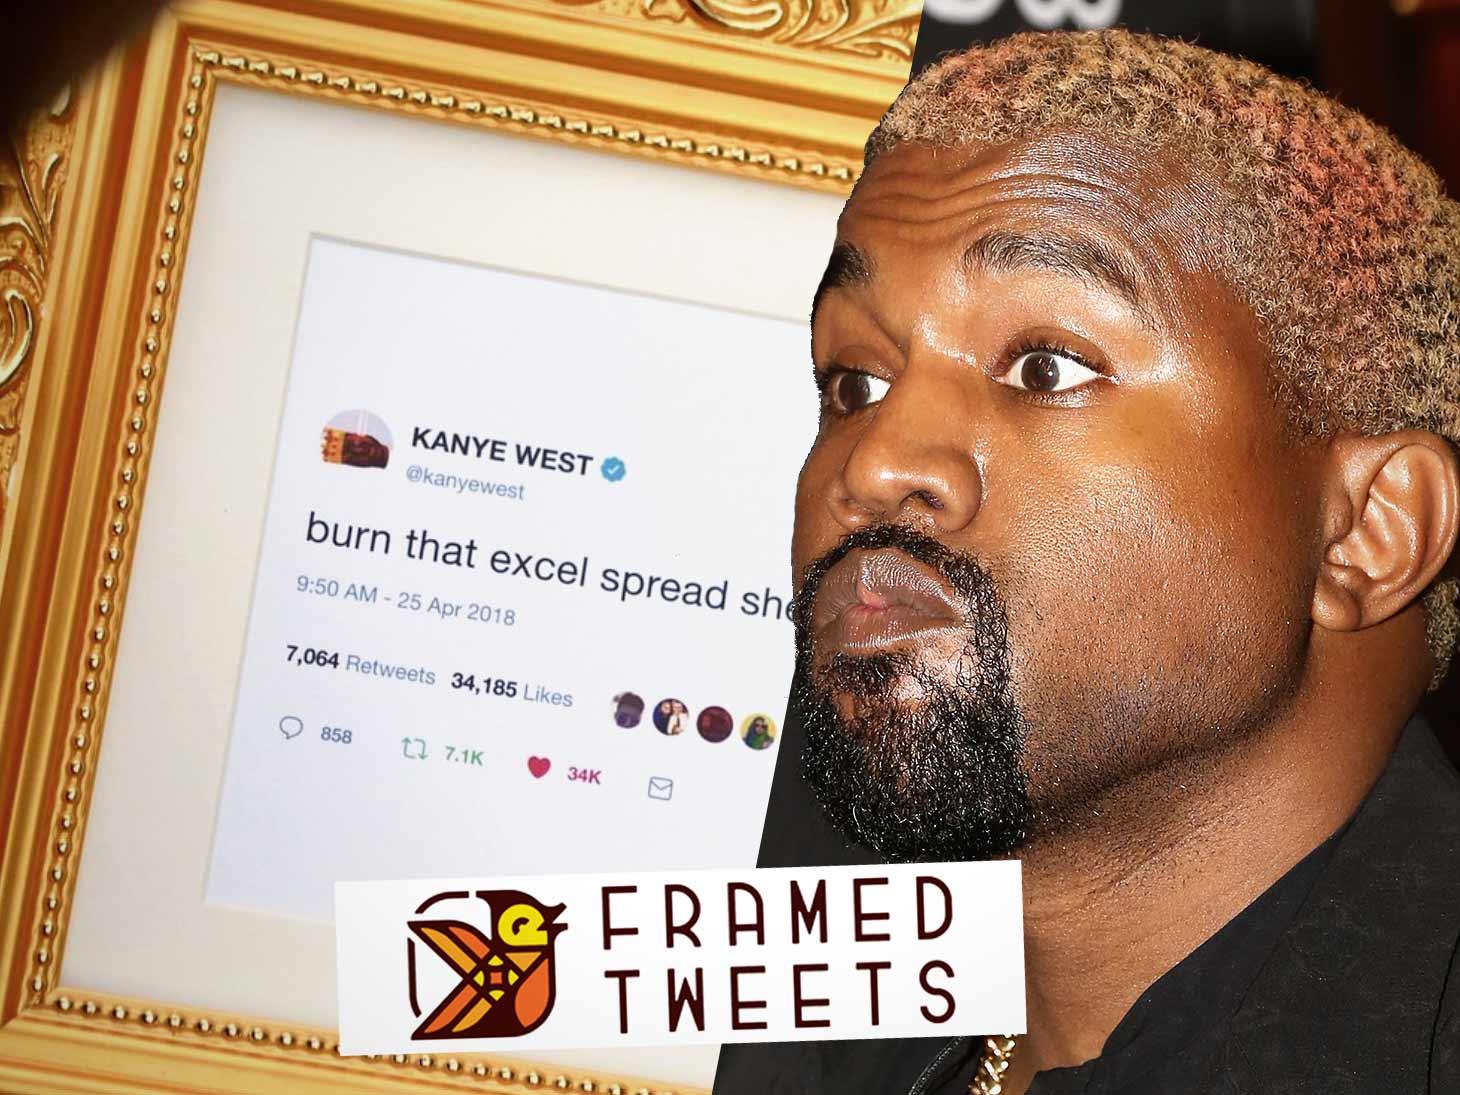 Kanye West Tweets Just Might Be the Best Xmas Gift Ever